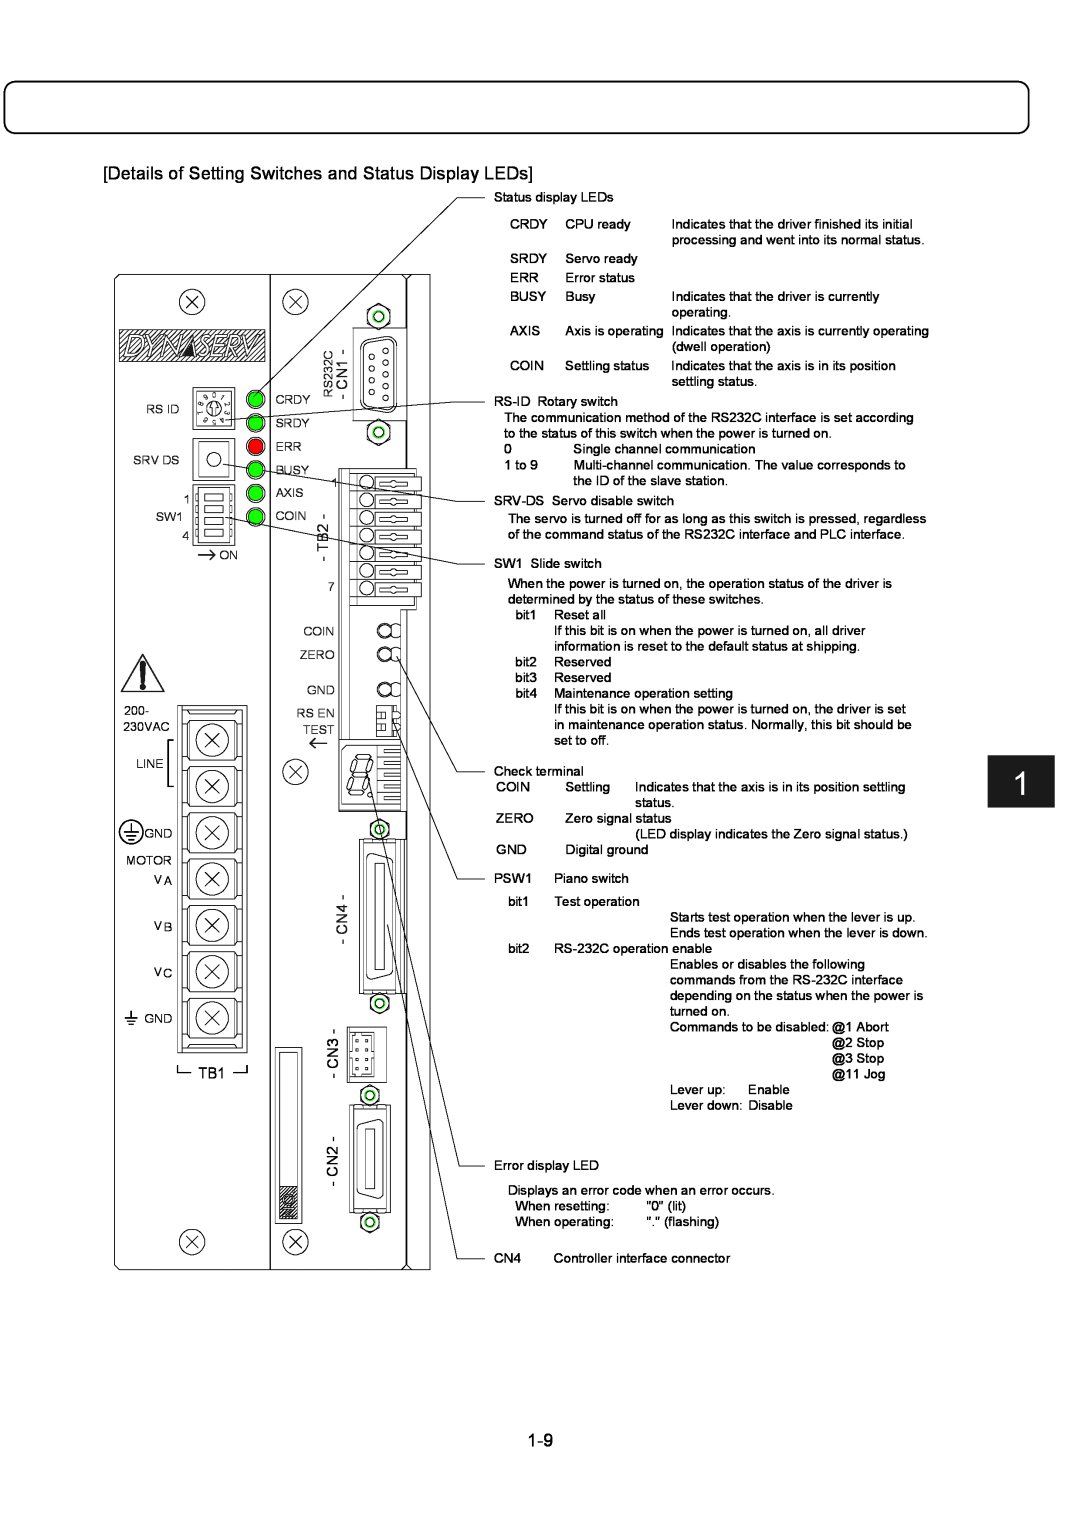 Parker Hannifin G2 manual Details of Setting Switches and Status Display LEDs, CN2 - - CN3 